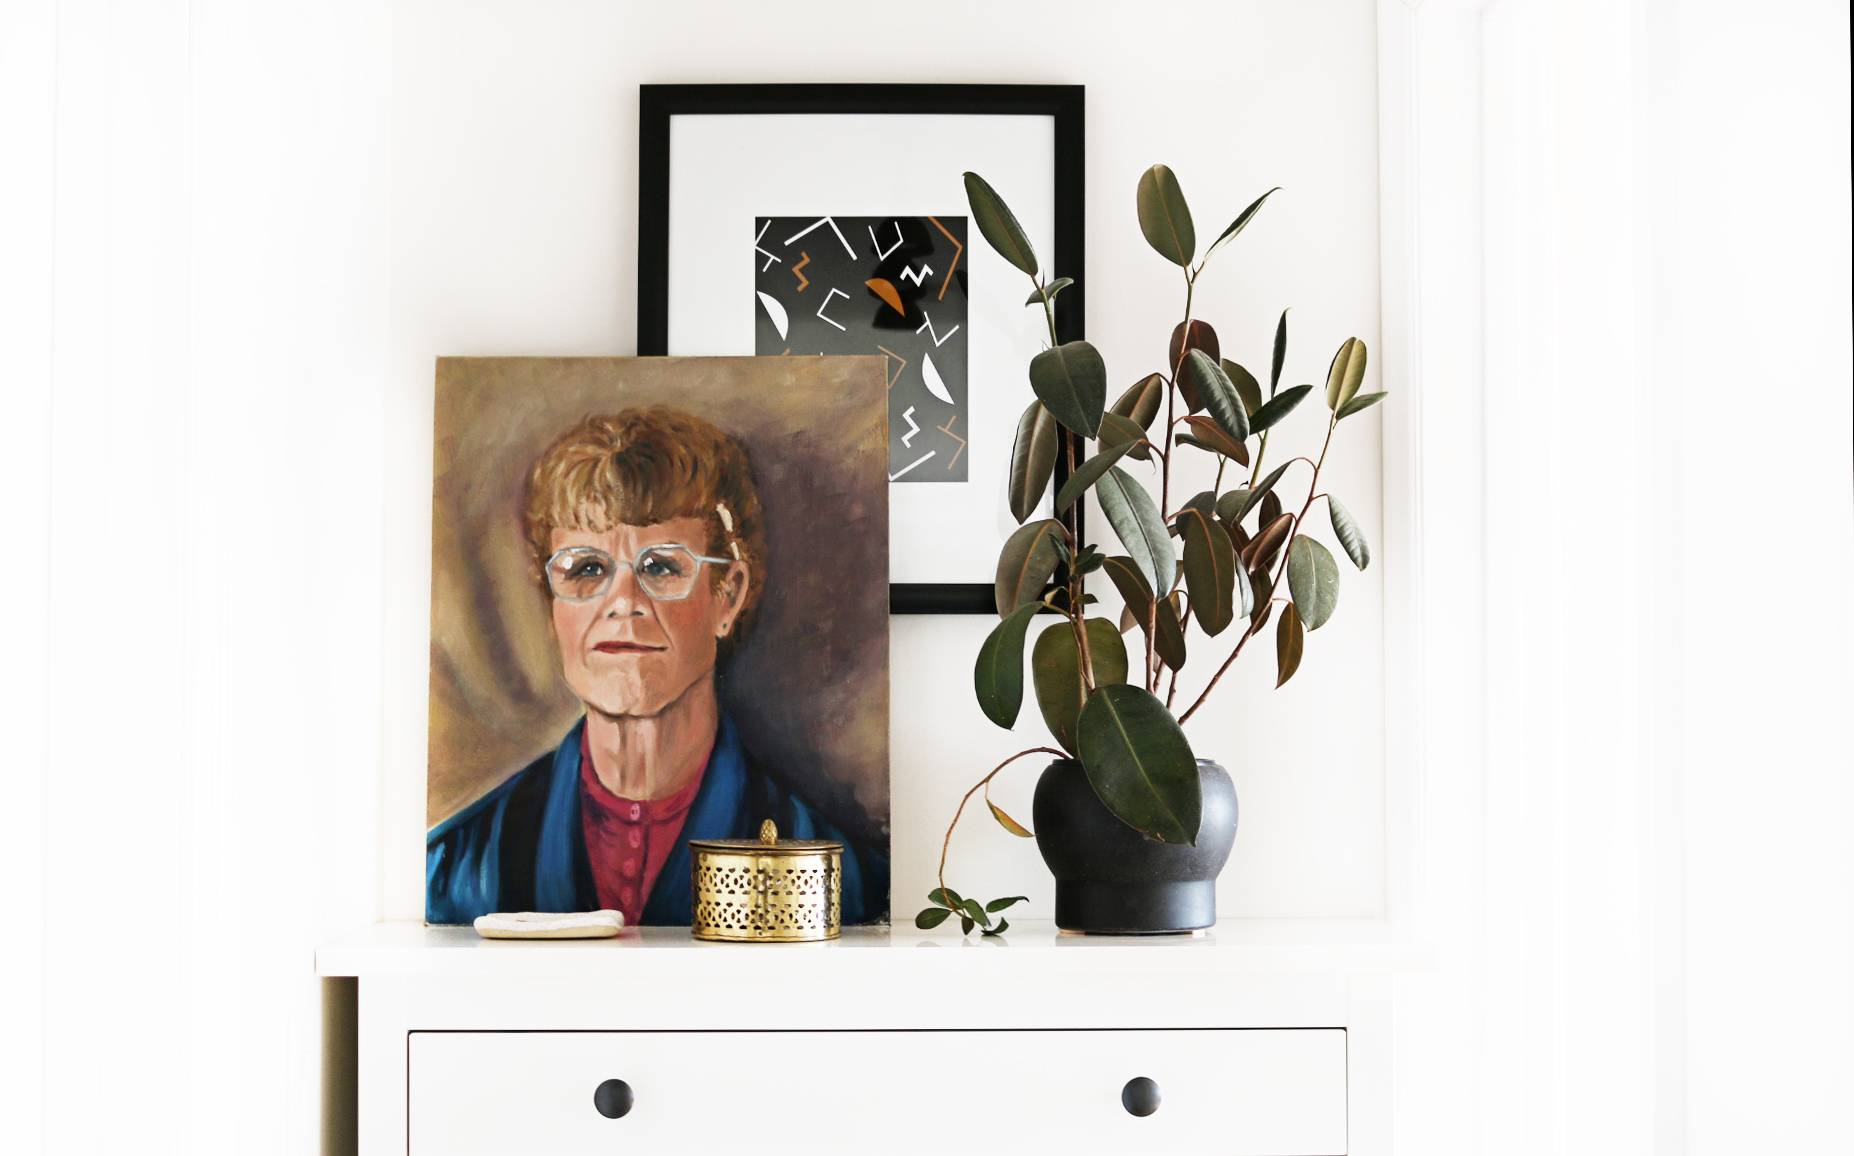 On a white chest of drawers, there is a potted plant on the right and a painting of a person to the left, with another picture visible behind it